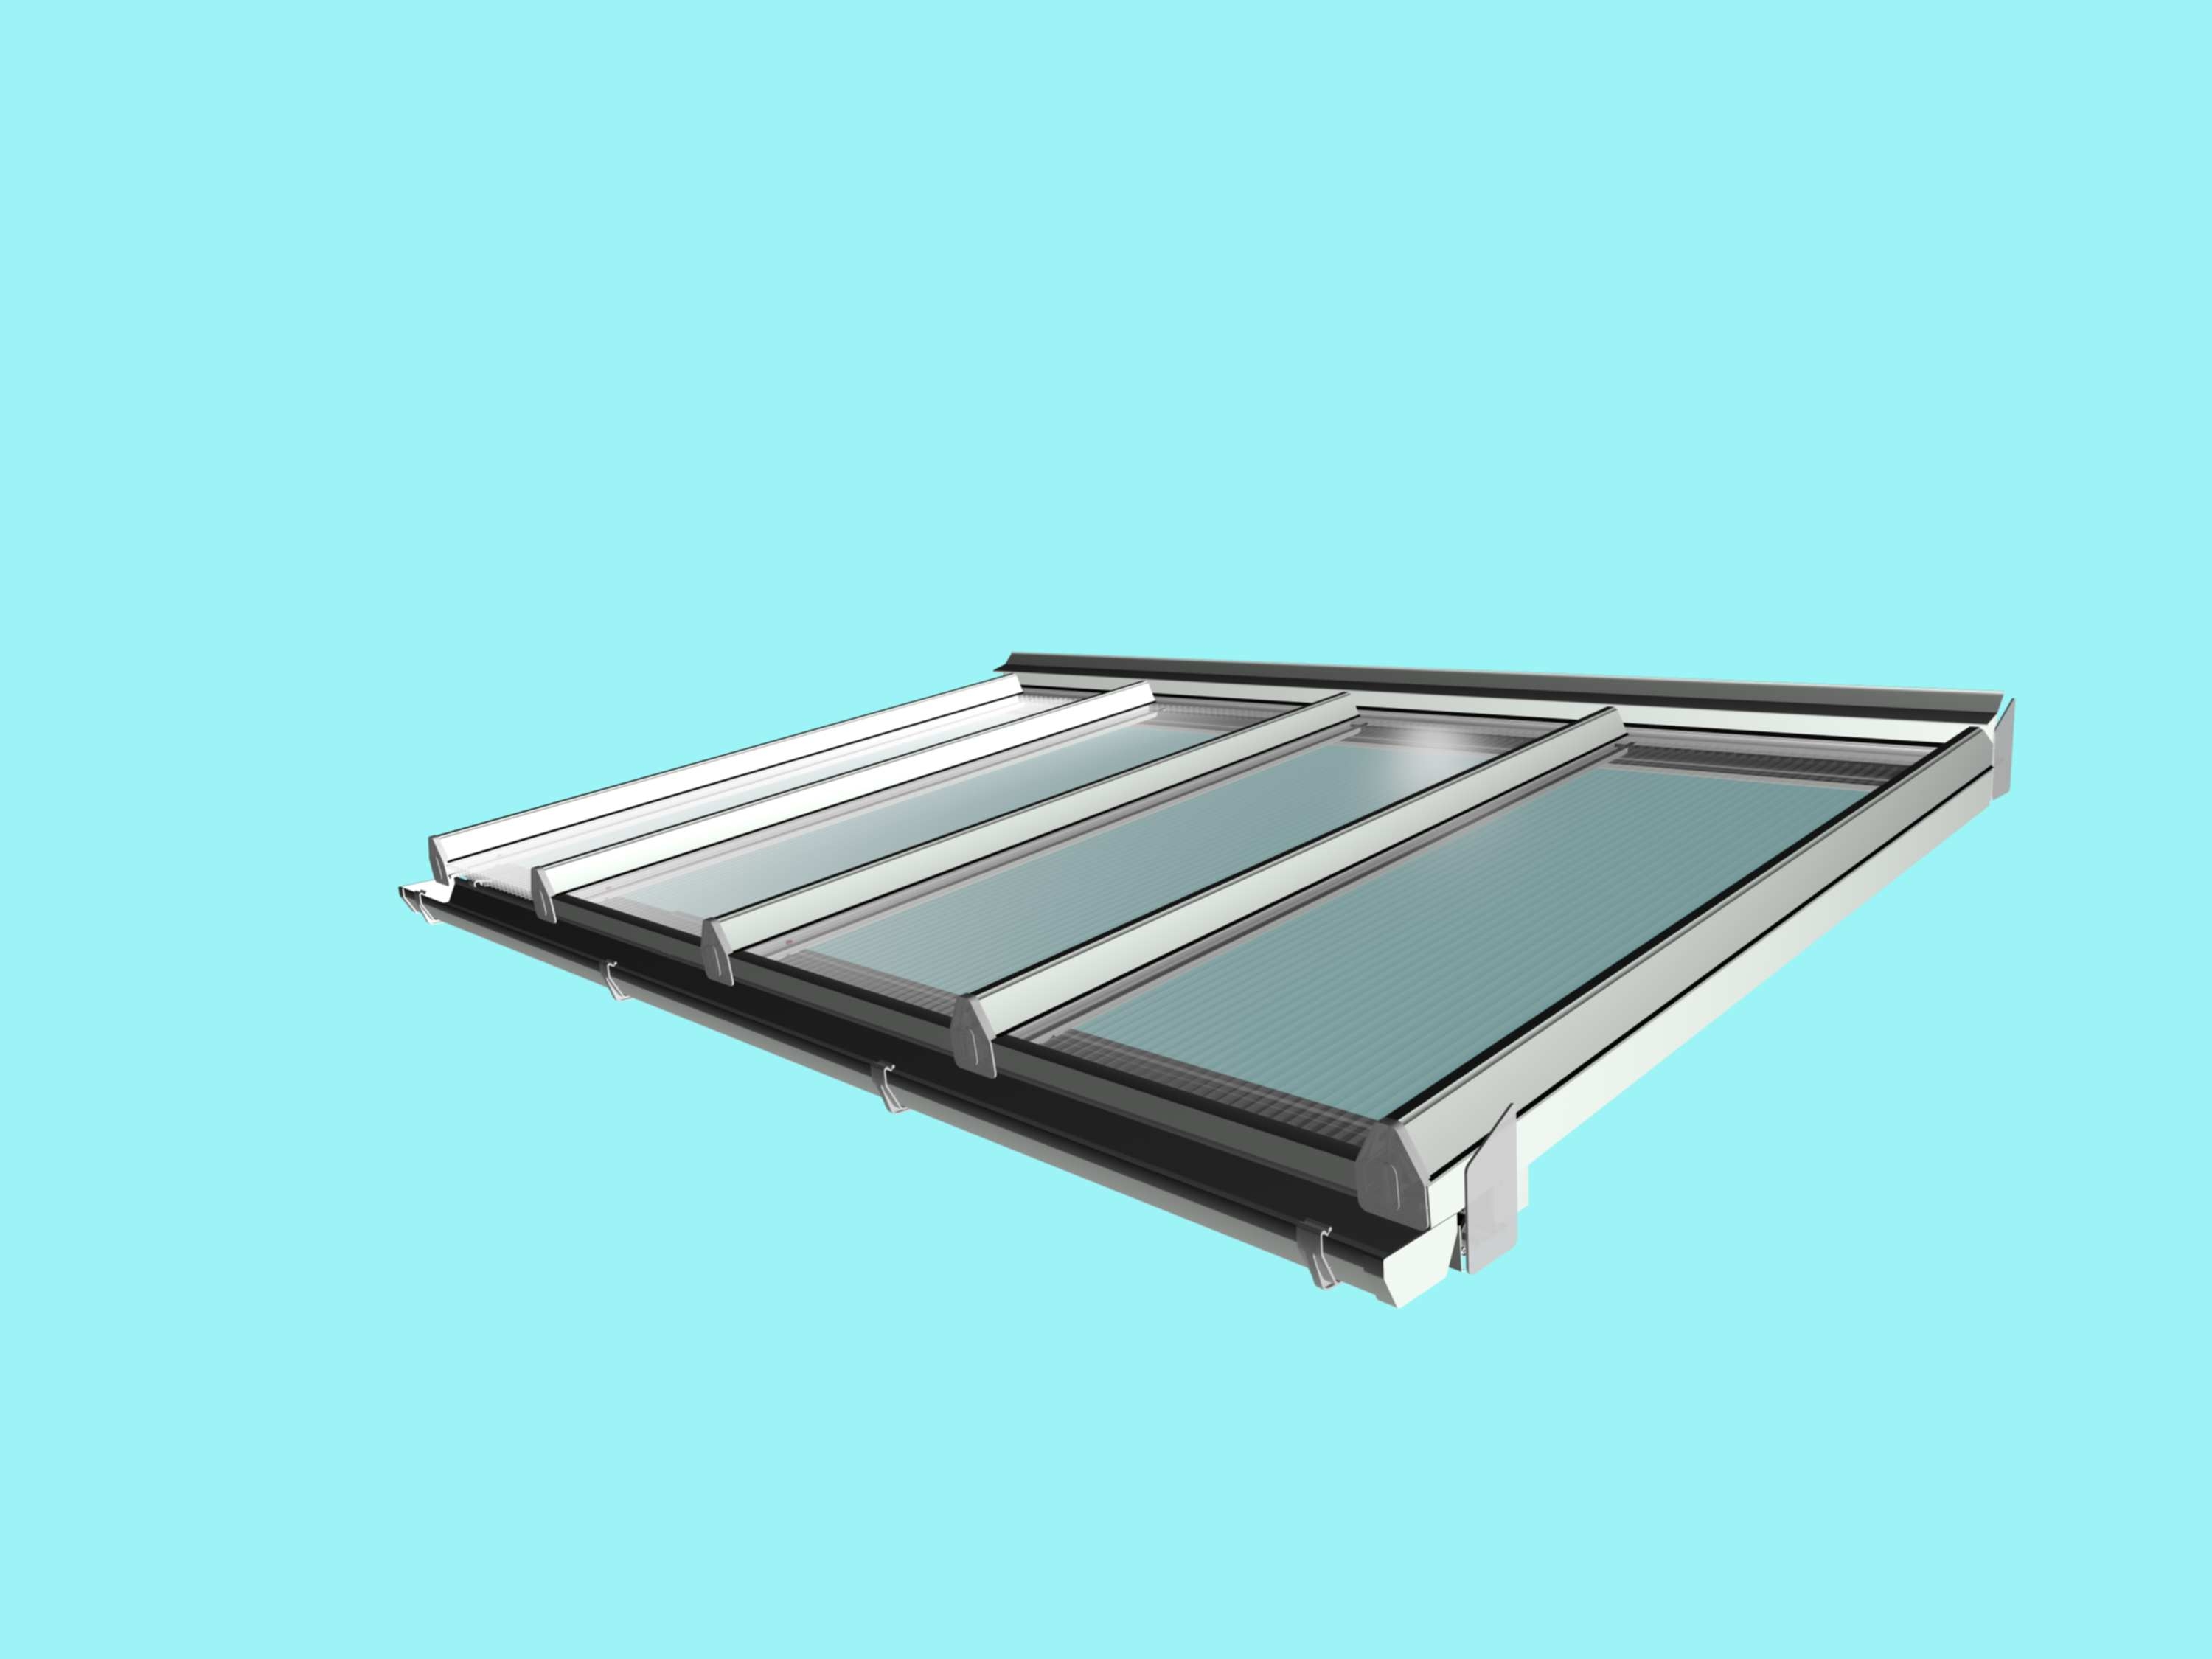 Self-Supporting DIY Conservatory Roof Kit for 16mm polycarbonate, 3.0m wide x 3.5m Projection from Omega Build